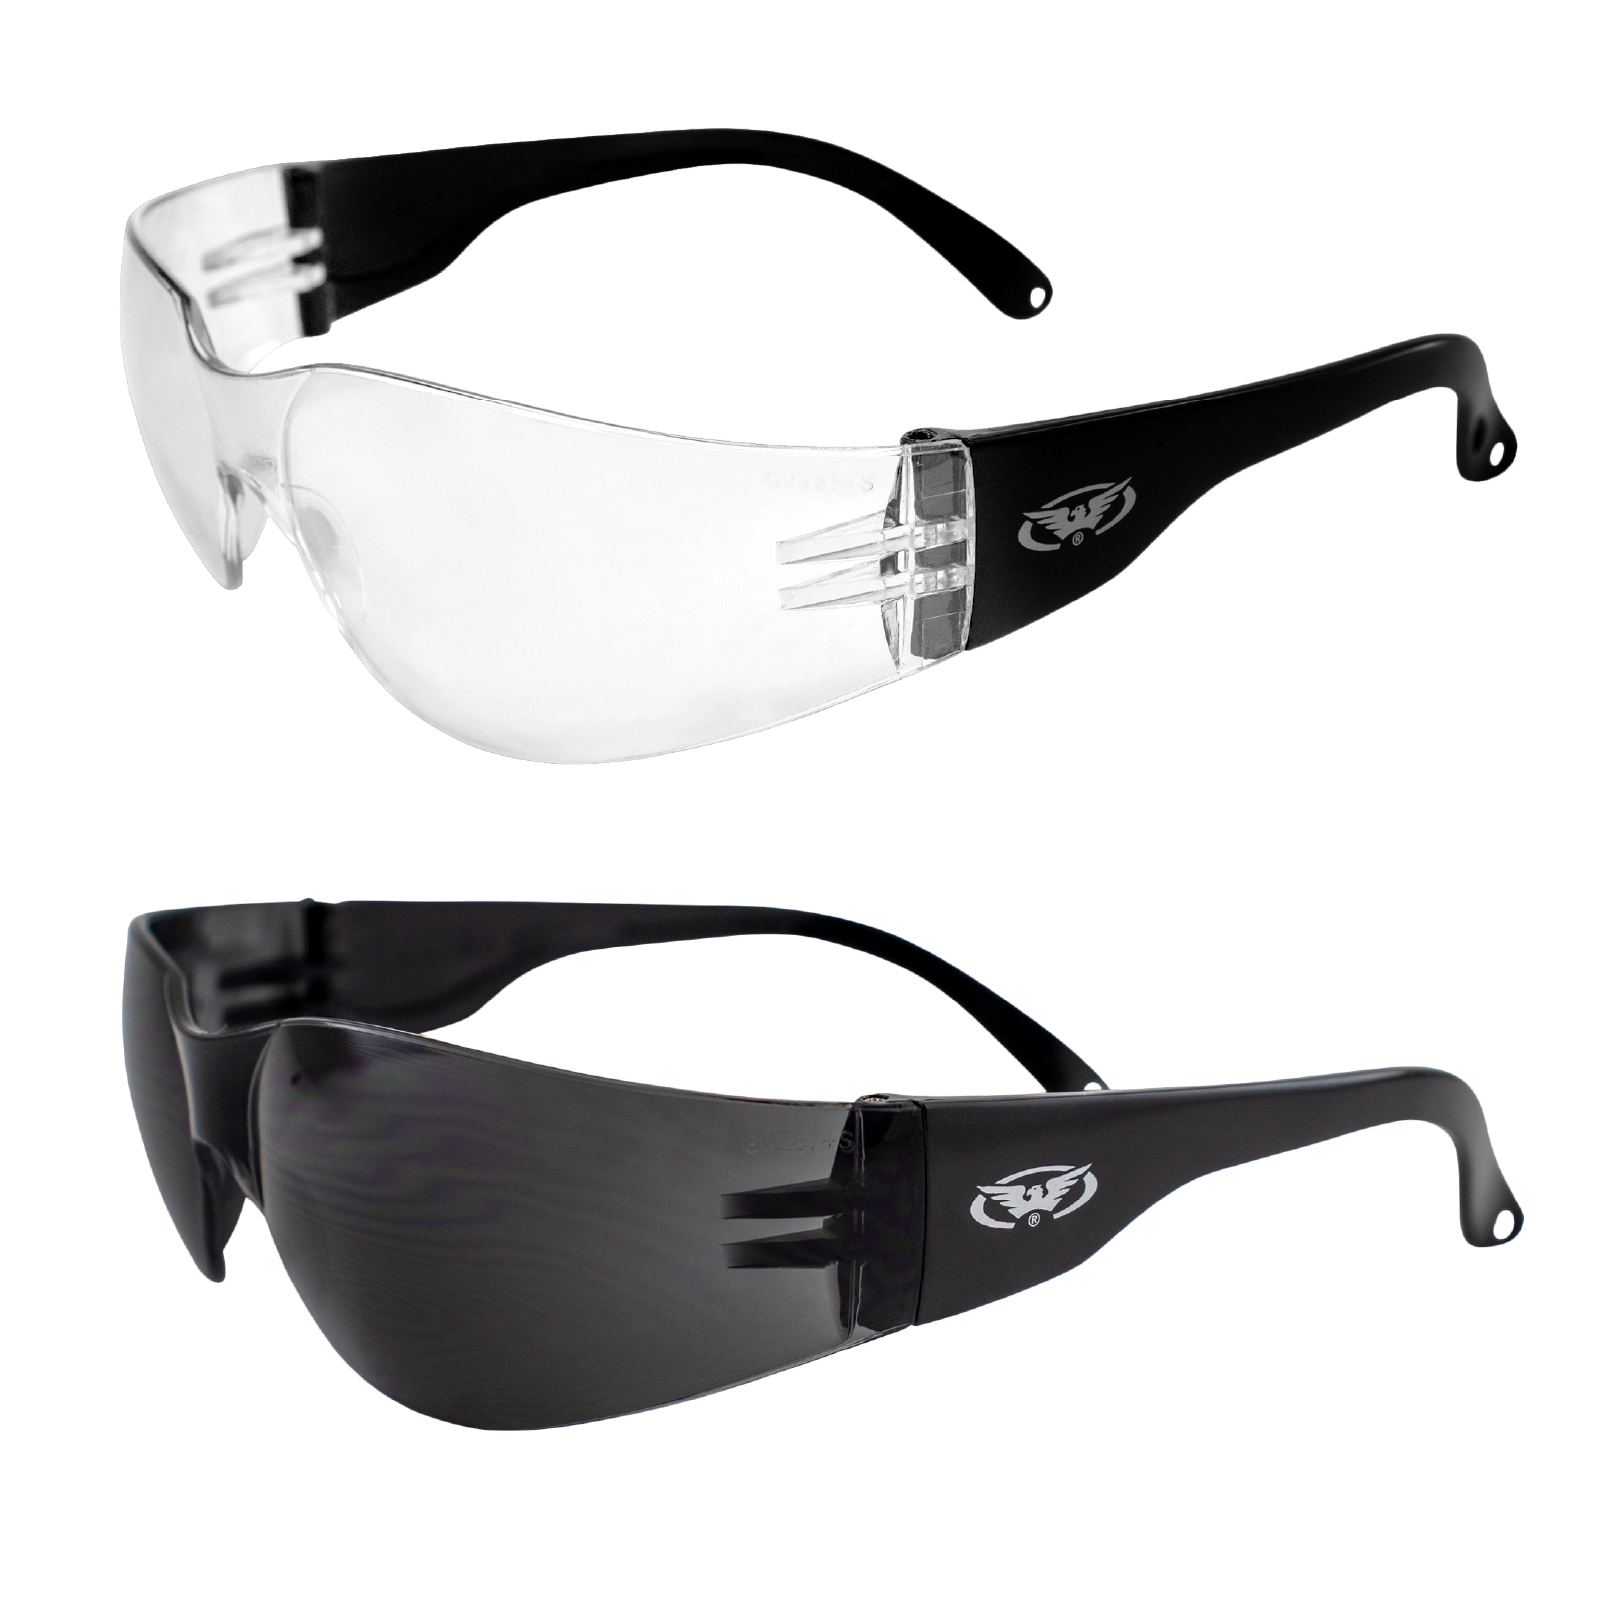 Two Pairs of Global Vision Rider Safety Motorcycle Riding Sunglasses Black Frames One Pair Clear Mirror Lens and One Pair Super Dark Lens with Microfiber Bags ANSI Z87.1 - image 1 of 4